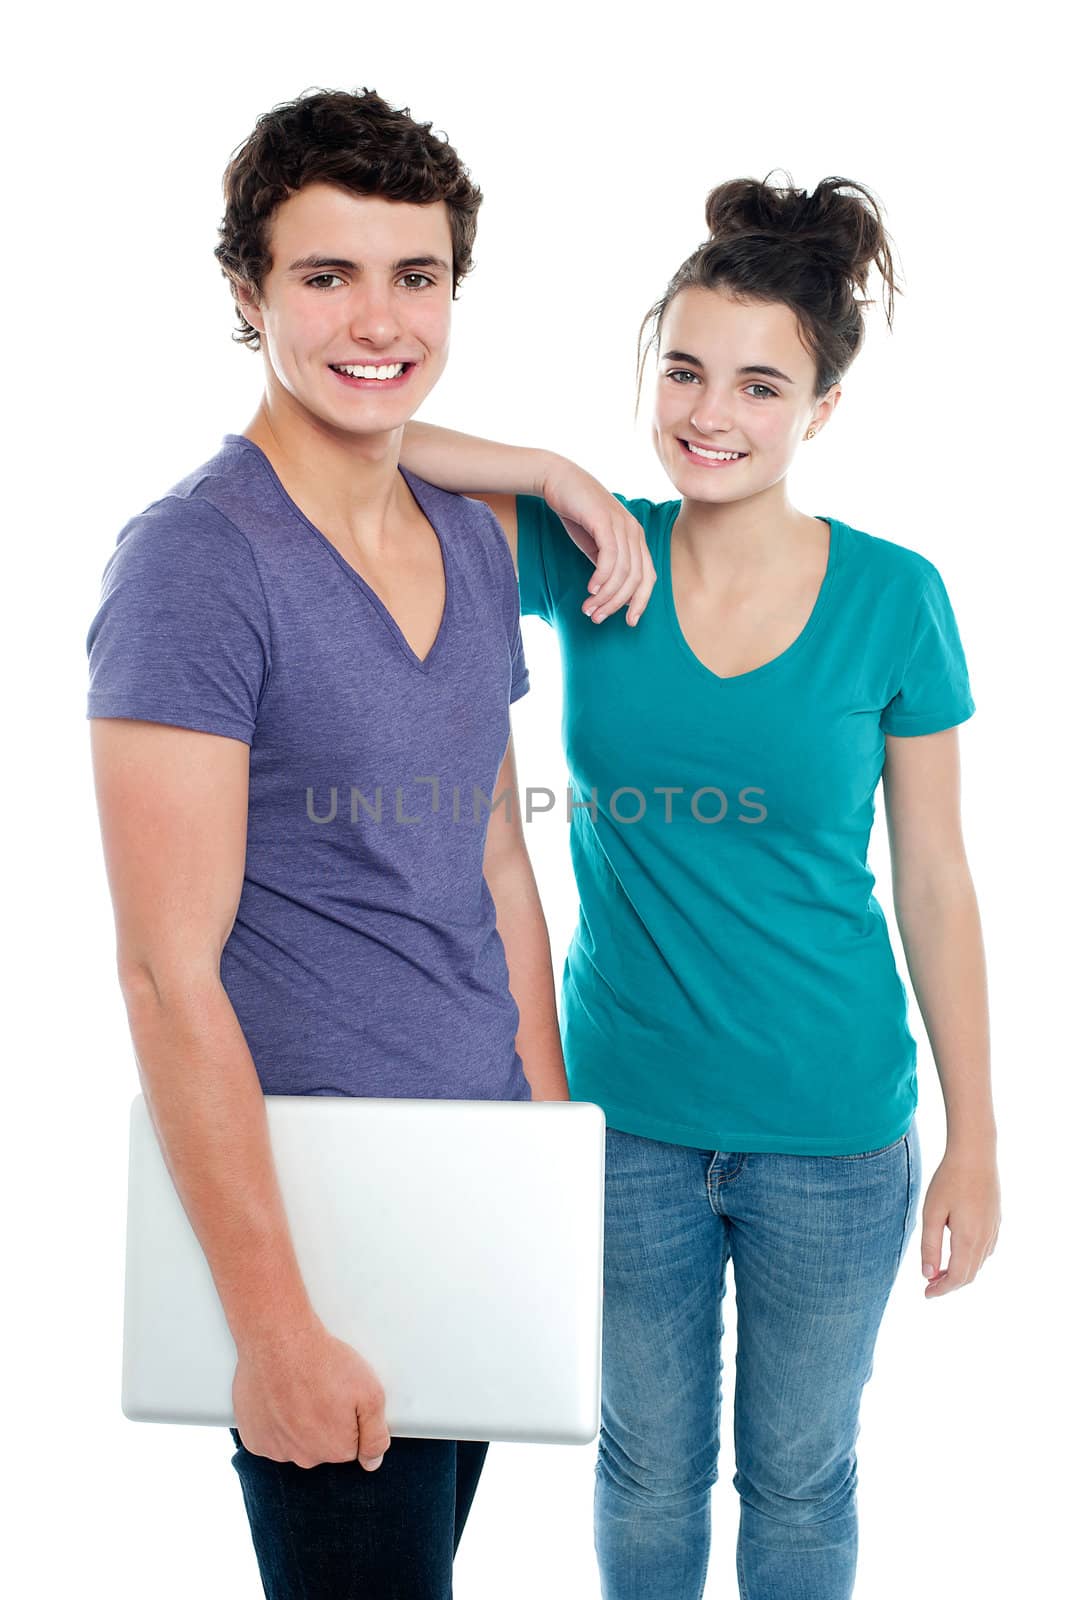 Handsome guy holding laptop posing with his girlfriend by stockyimages